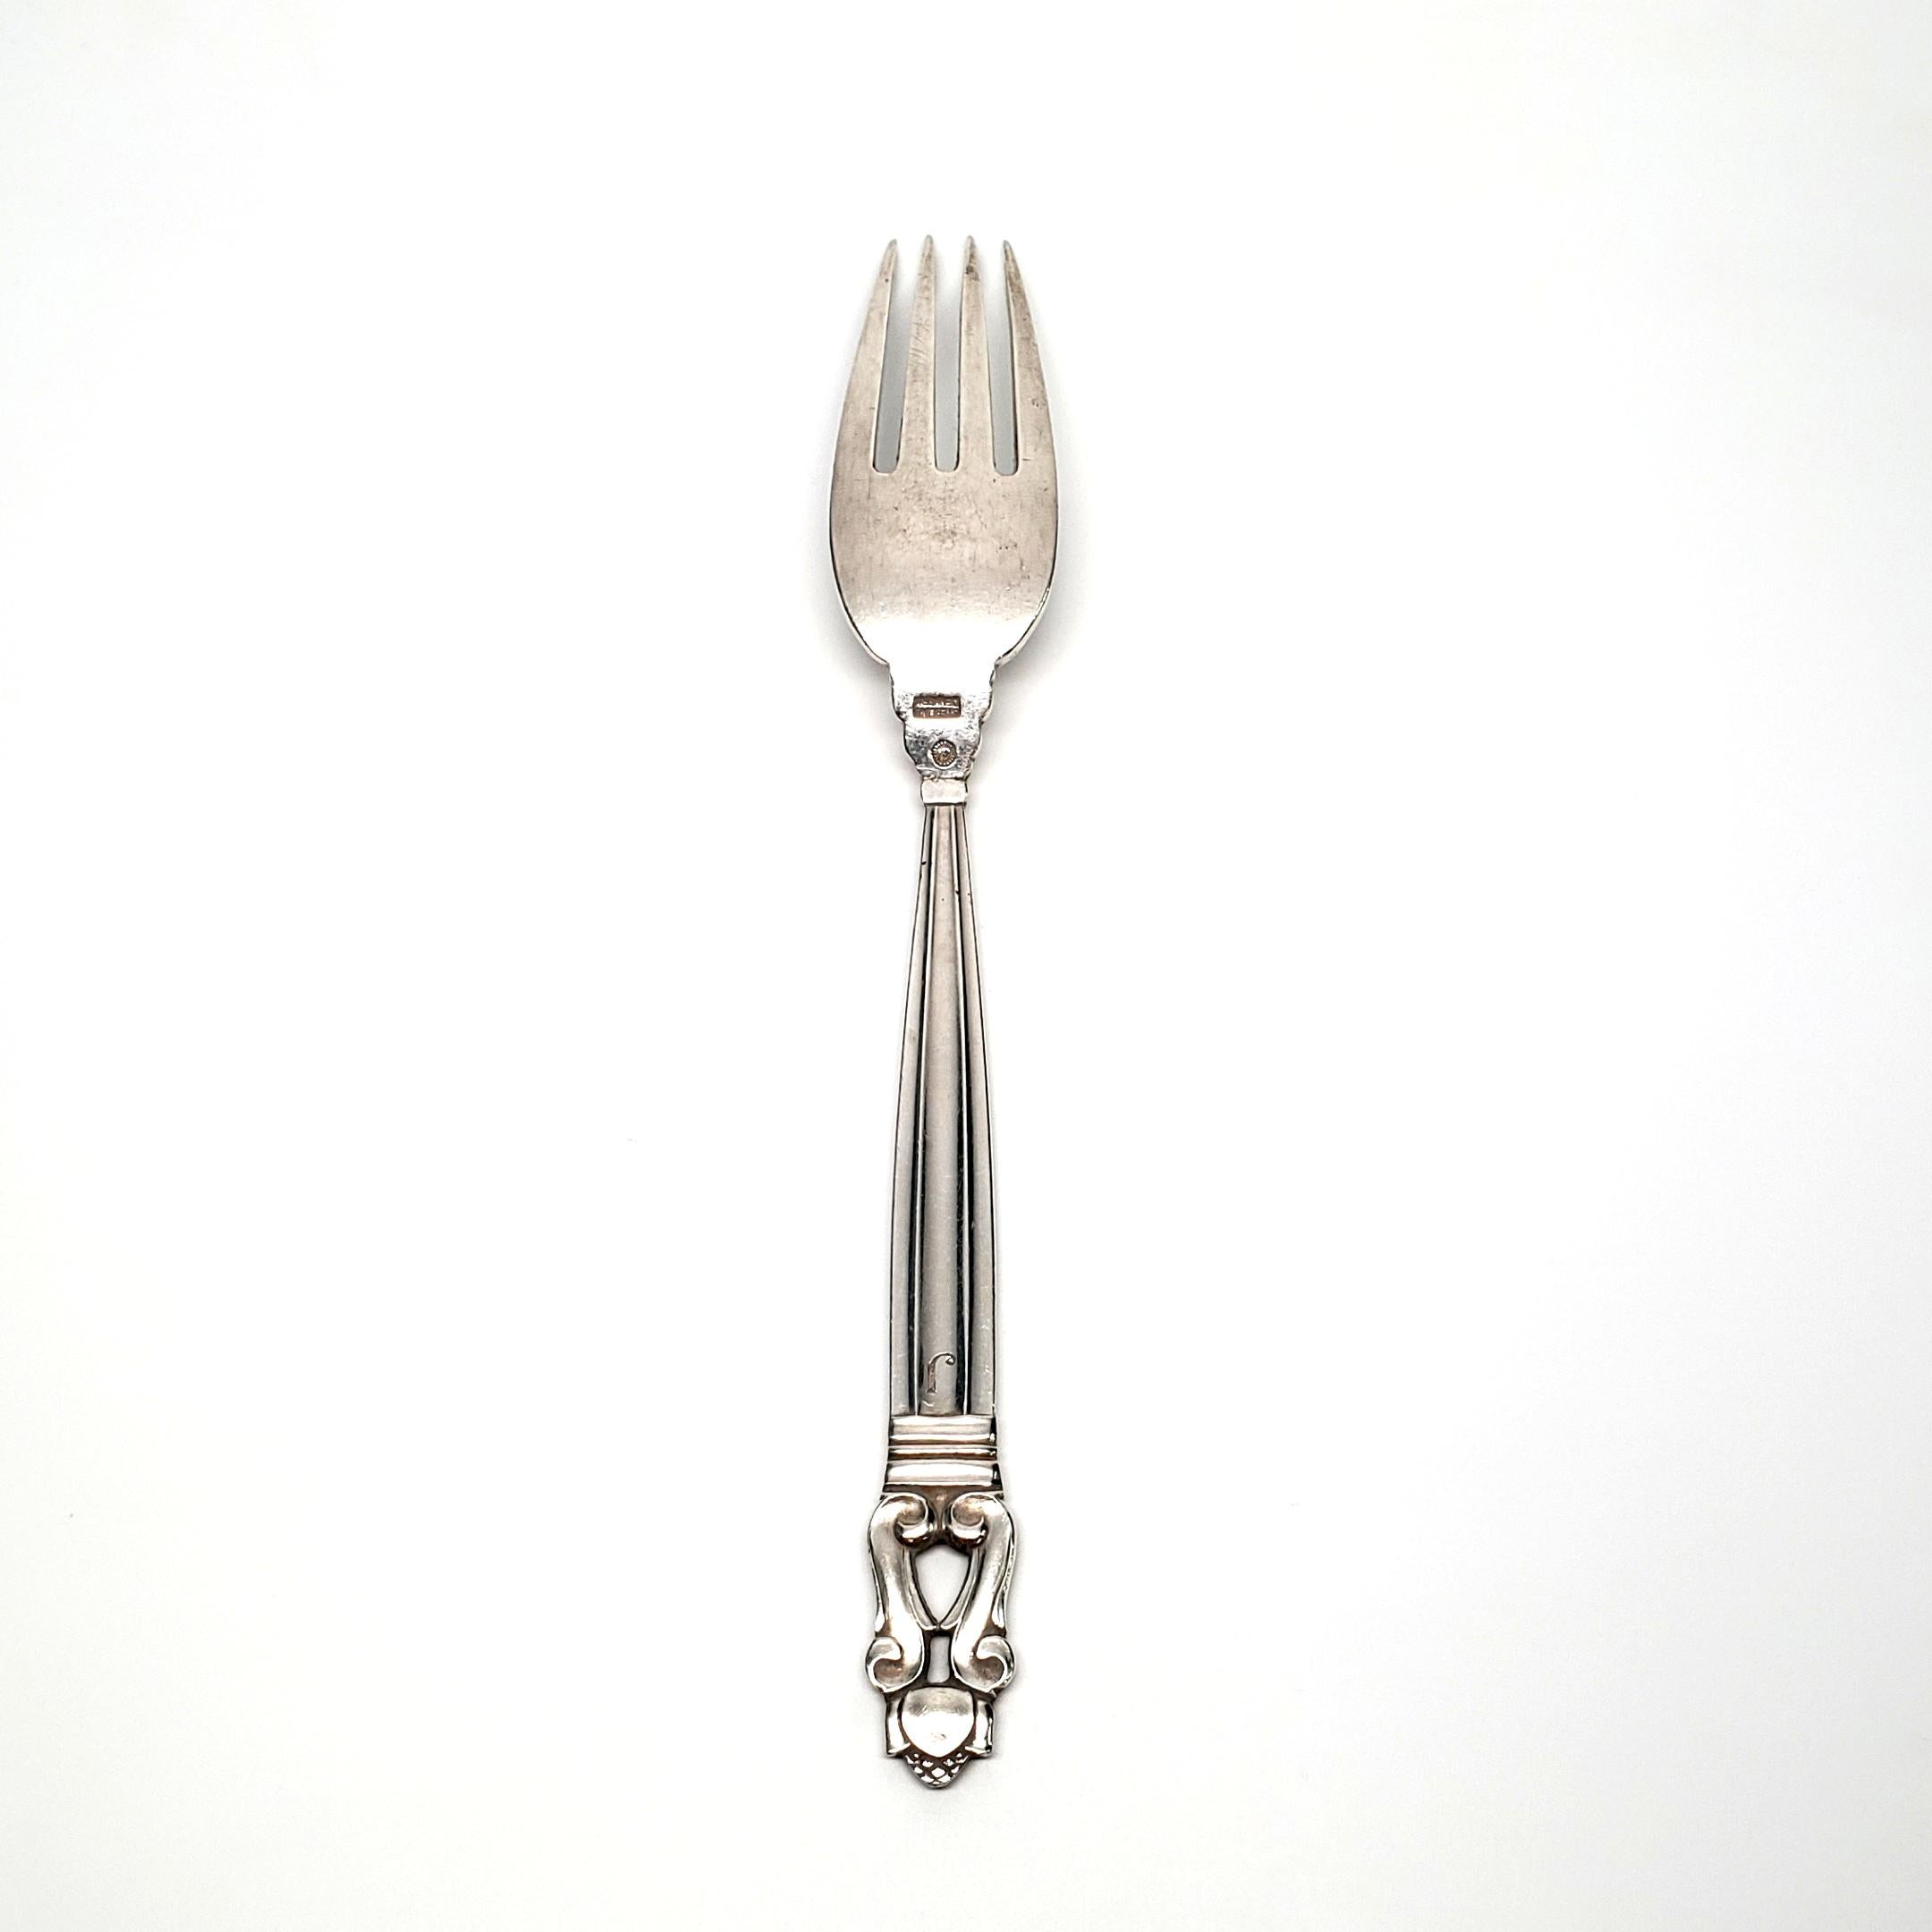 Vintage sterling silver European fork from Georg Jensen in the Acorn pattern.

The Acorn pattern was introduced in 1915 as a collaboration between Georg Jensen and designer Johan Ronde. The Acorn pattern, which combines Art Nouveau and Art Deco